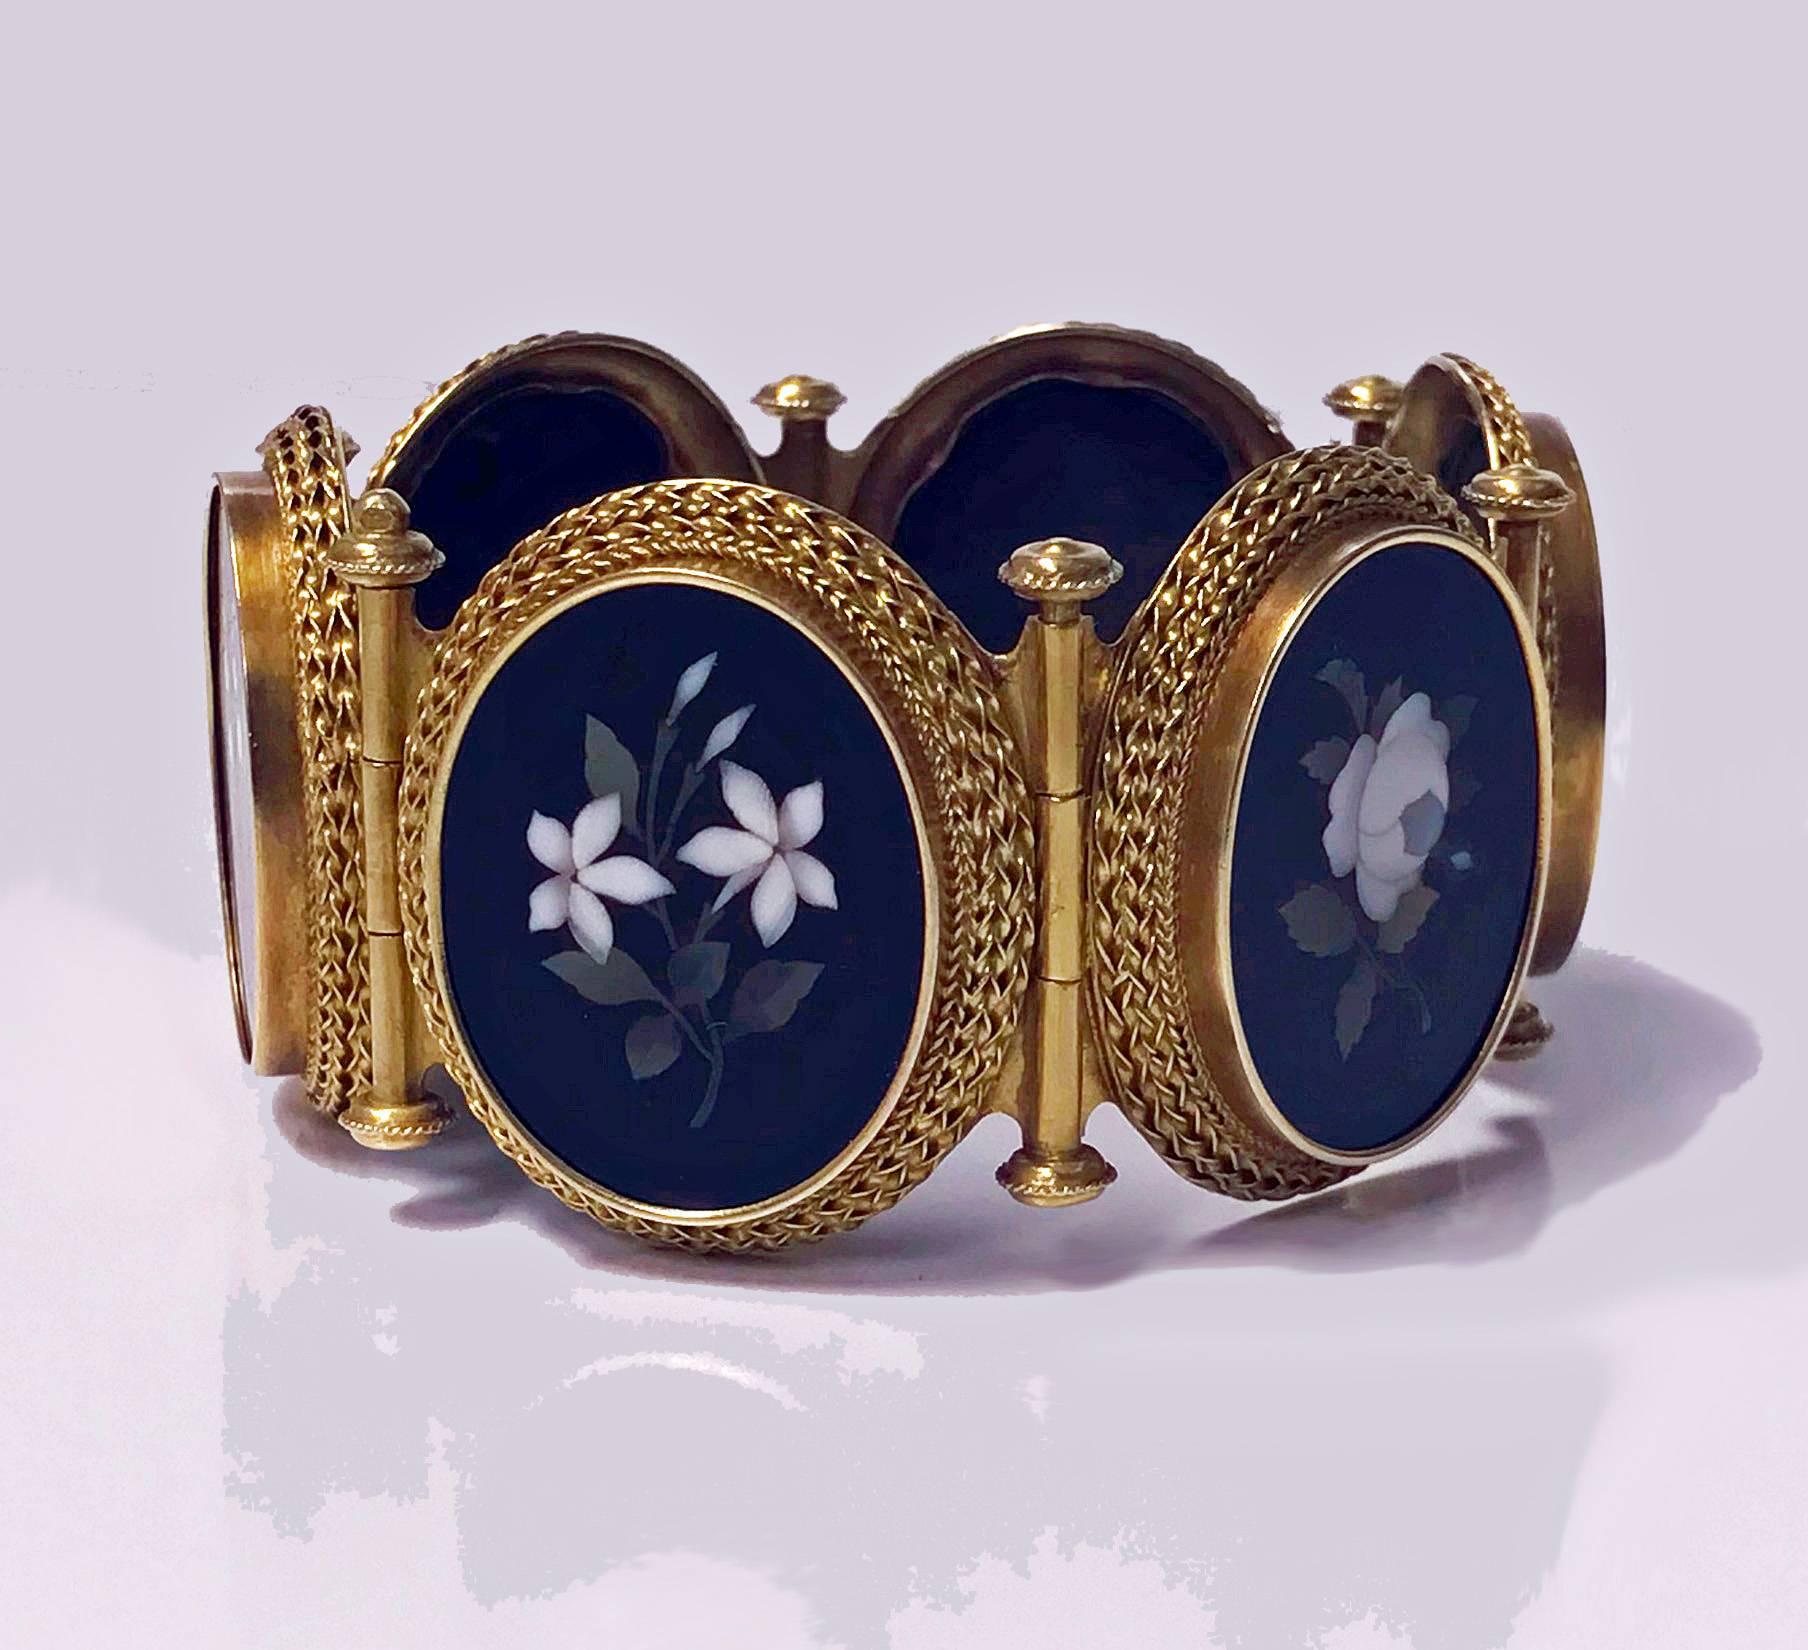 Very Fine 19th century 18K (tested) Gold Pietra Dura Bracelet, Italy C.1875. The bracelet with six  oval etruscan granular gold set pietra dura  depicting foliage, detachable hinged gold links between, terminating with link conforming as fastener.